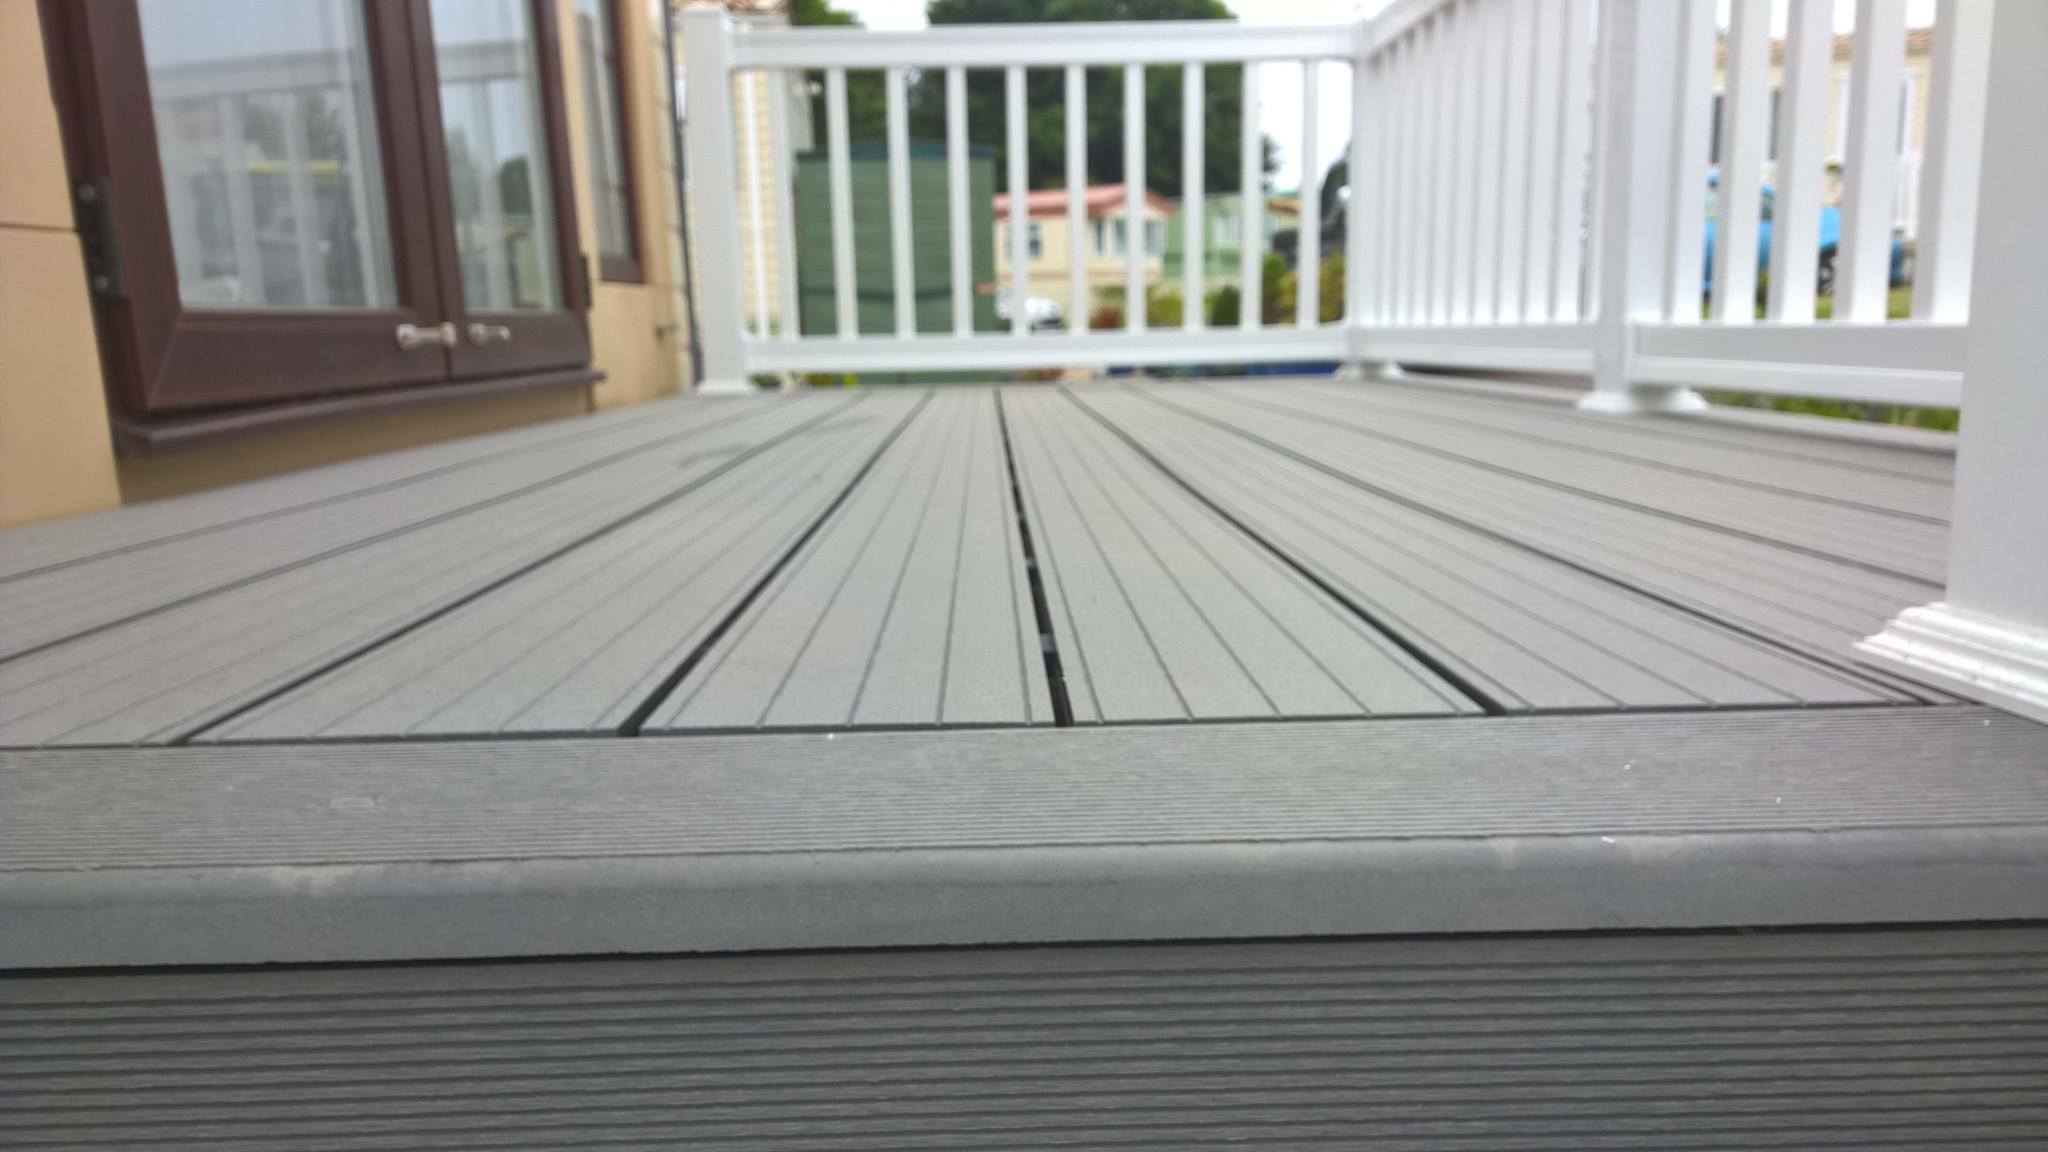 Cladco Bullnose Decking Boards are added to the range